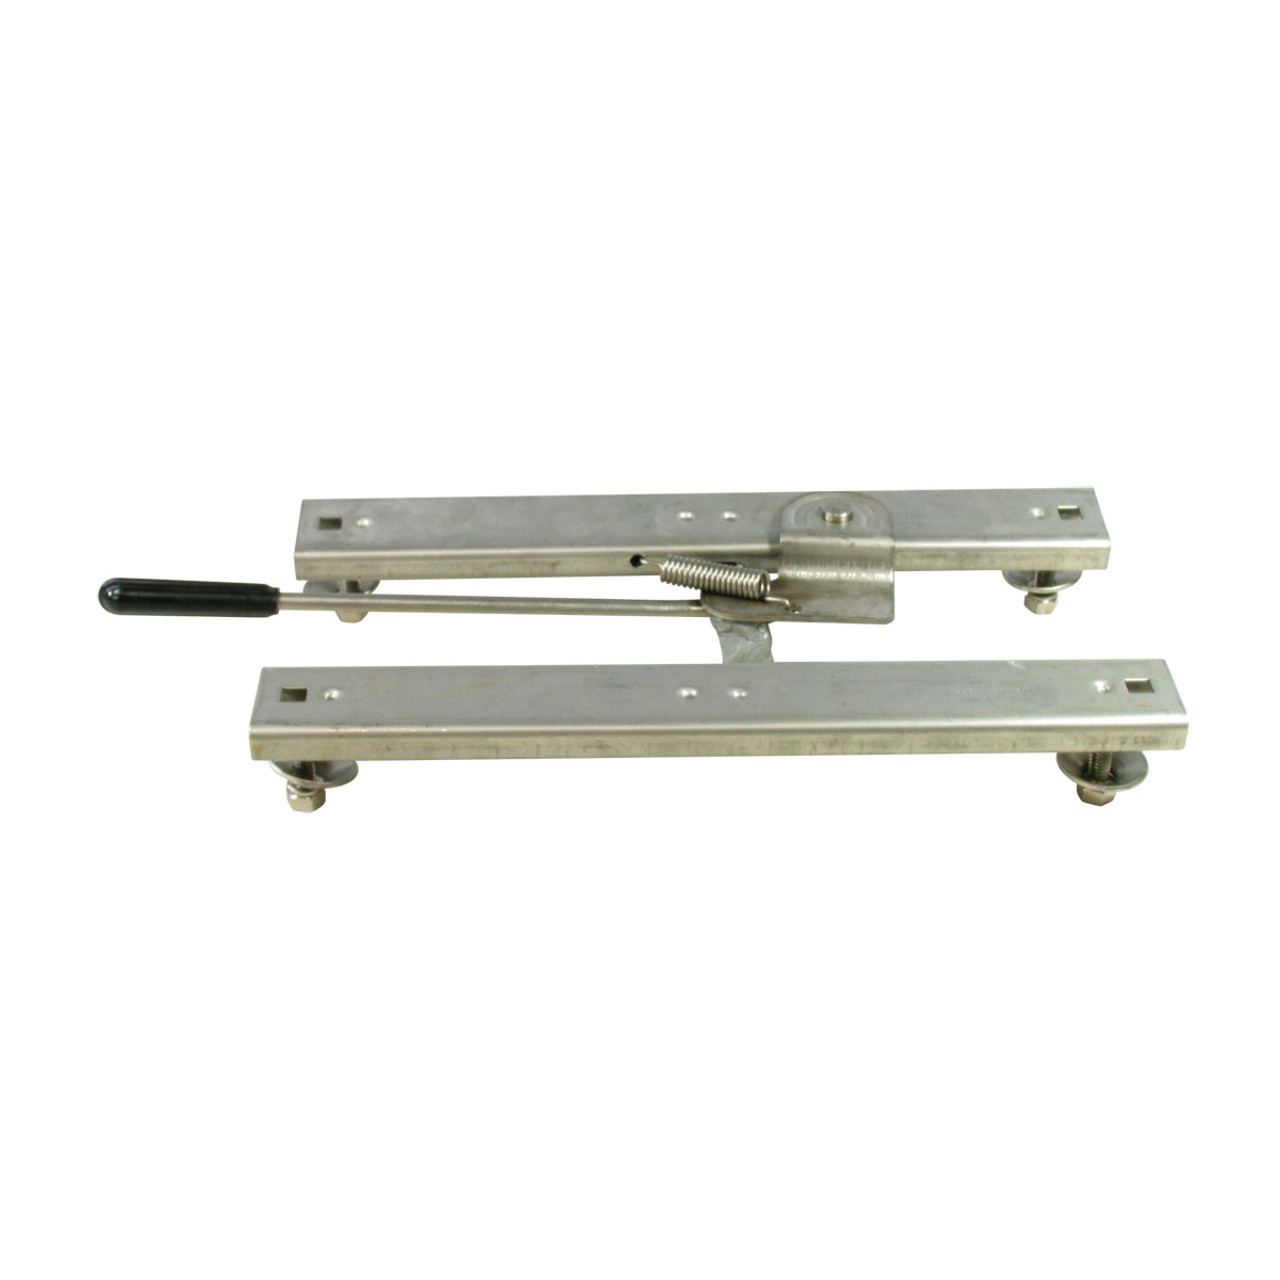 Seat slider assembly Low profile- stainless steel.